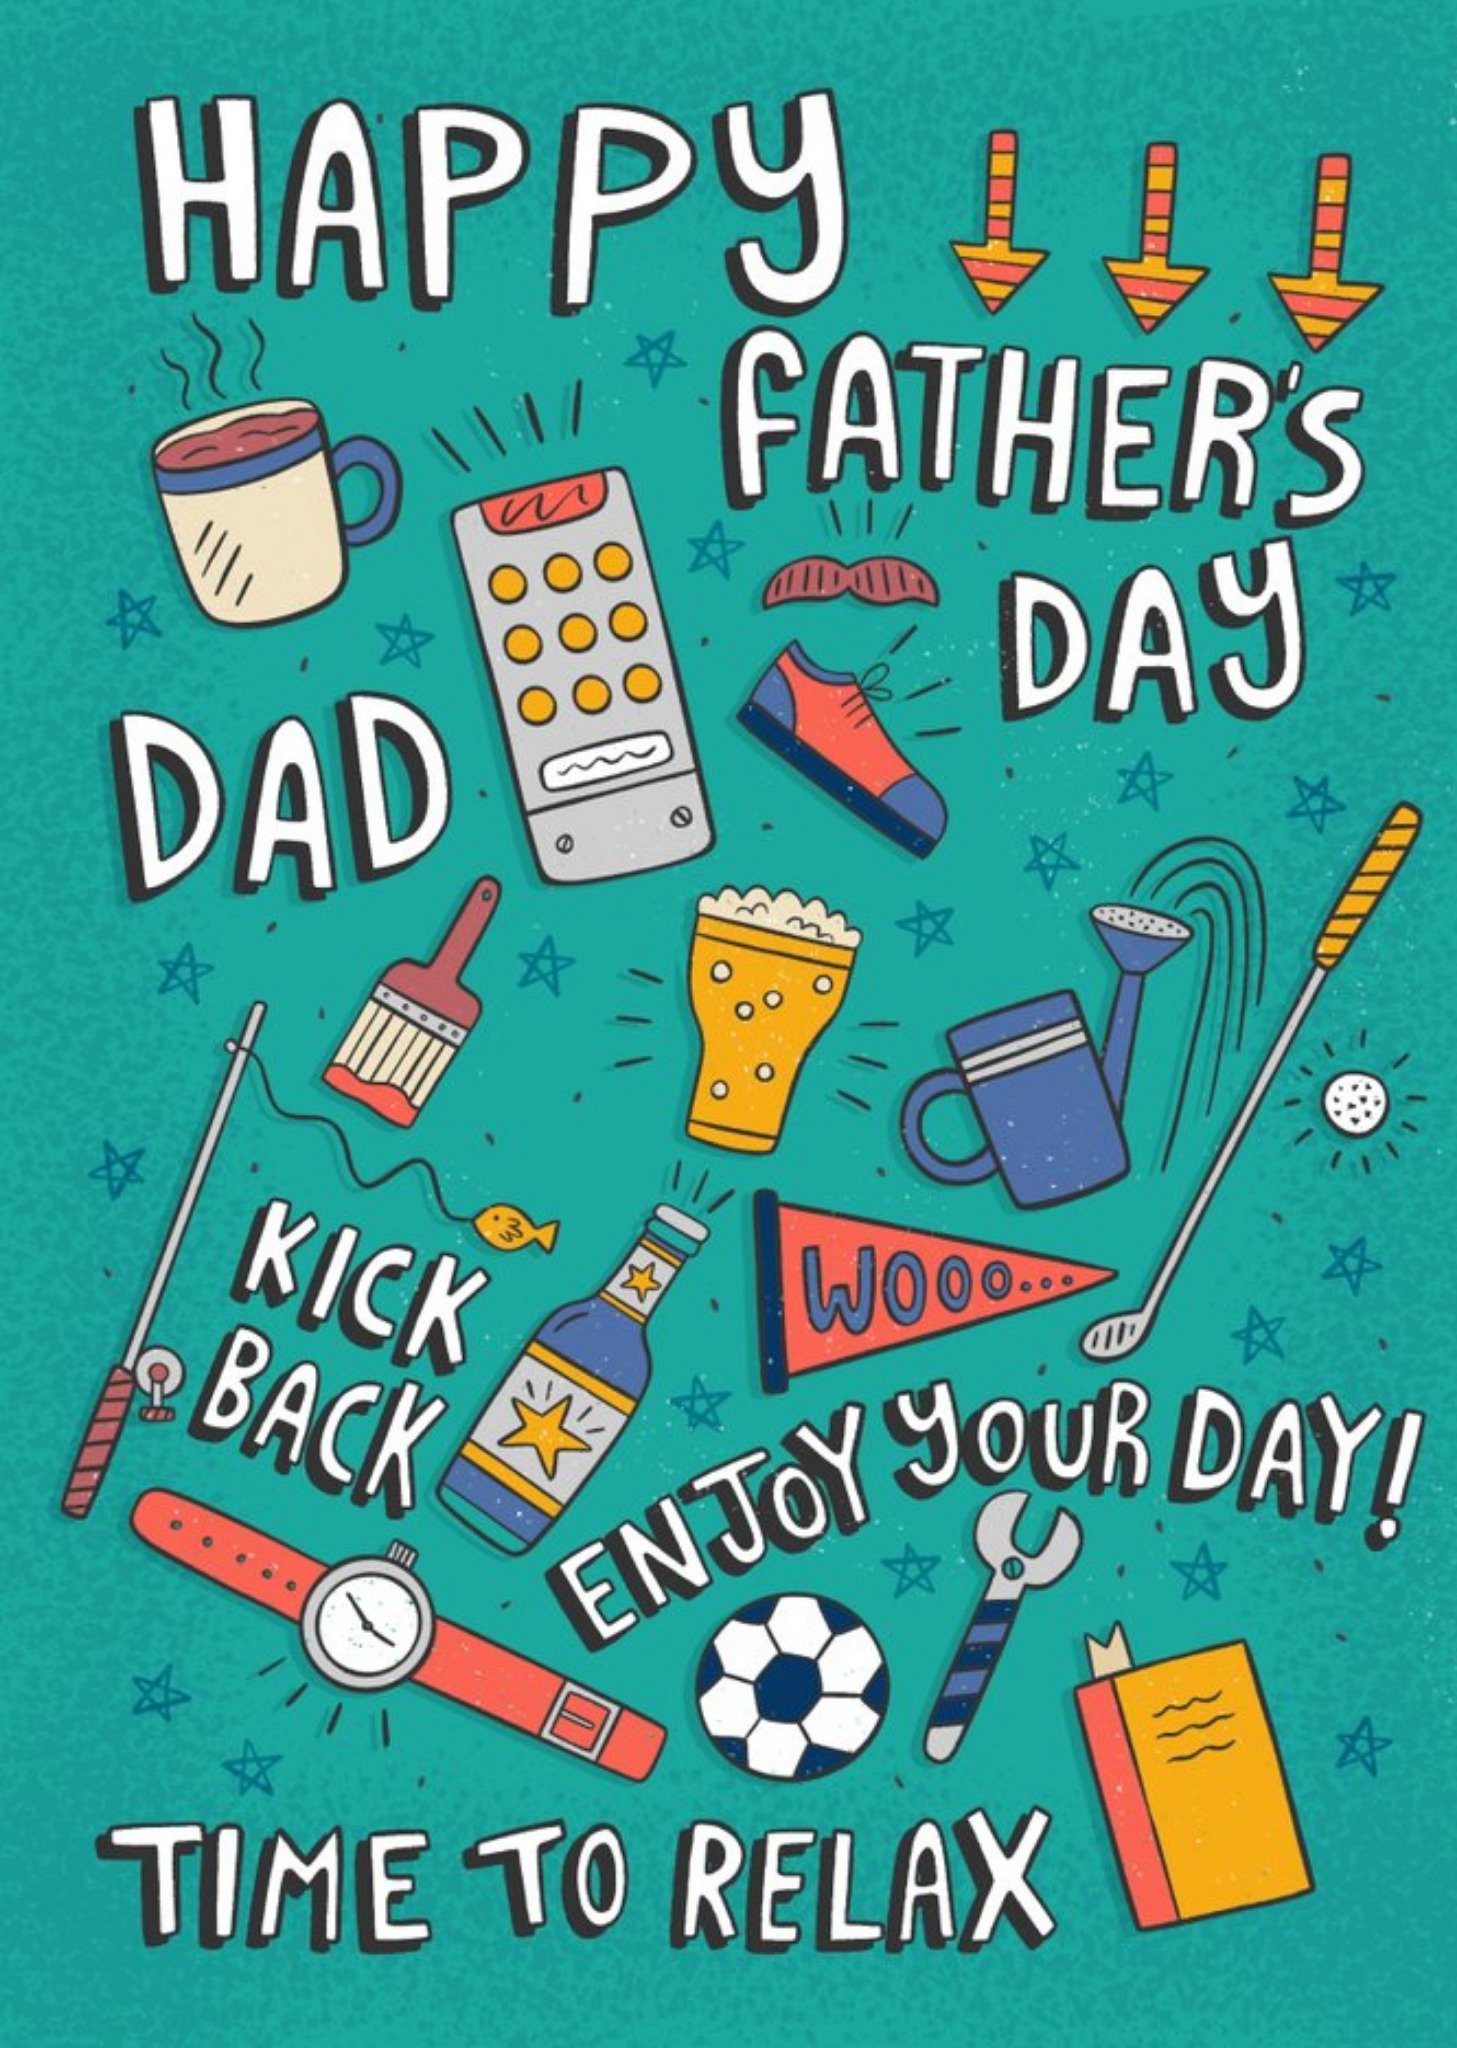 Moonpig Cute Illustrations Happy Fathers Day Kick Back Enjoy Your Day Time To Relax Card Ecard